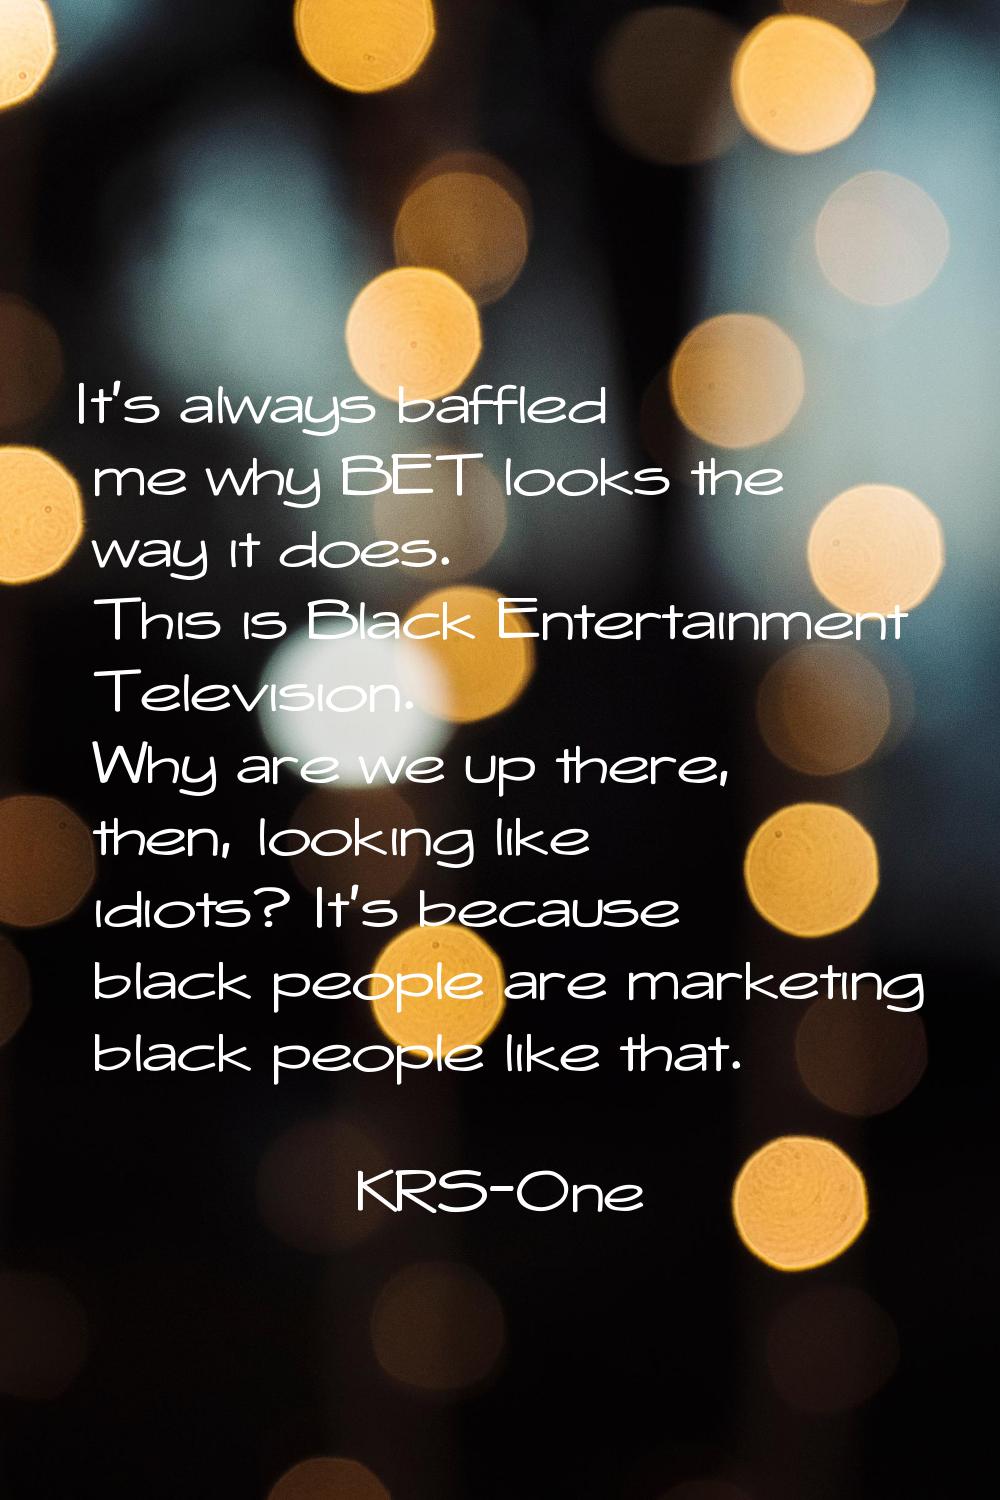 It's always baffled me why BET looks the way it does. This is Black Entertainment Television. Why a